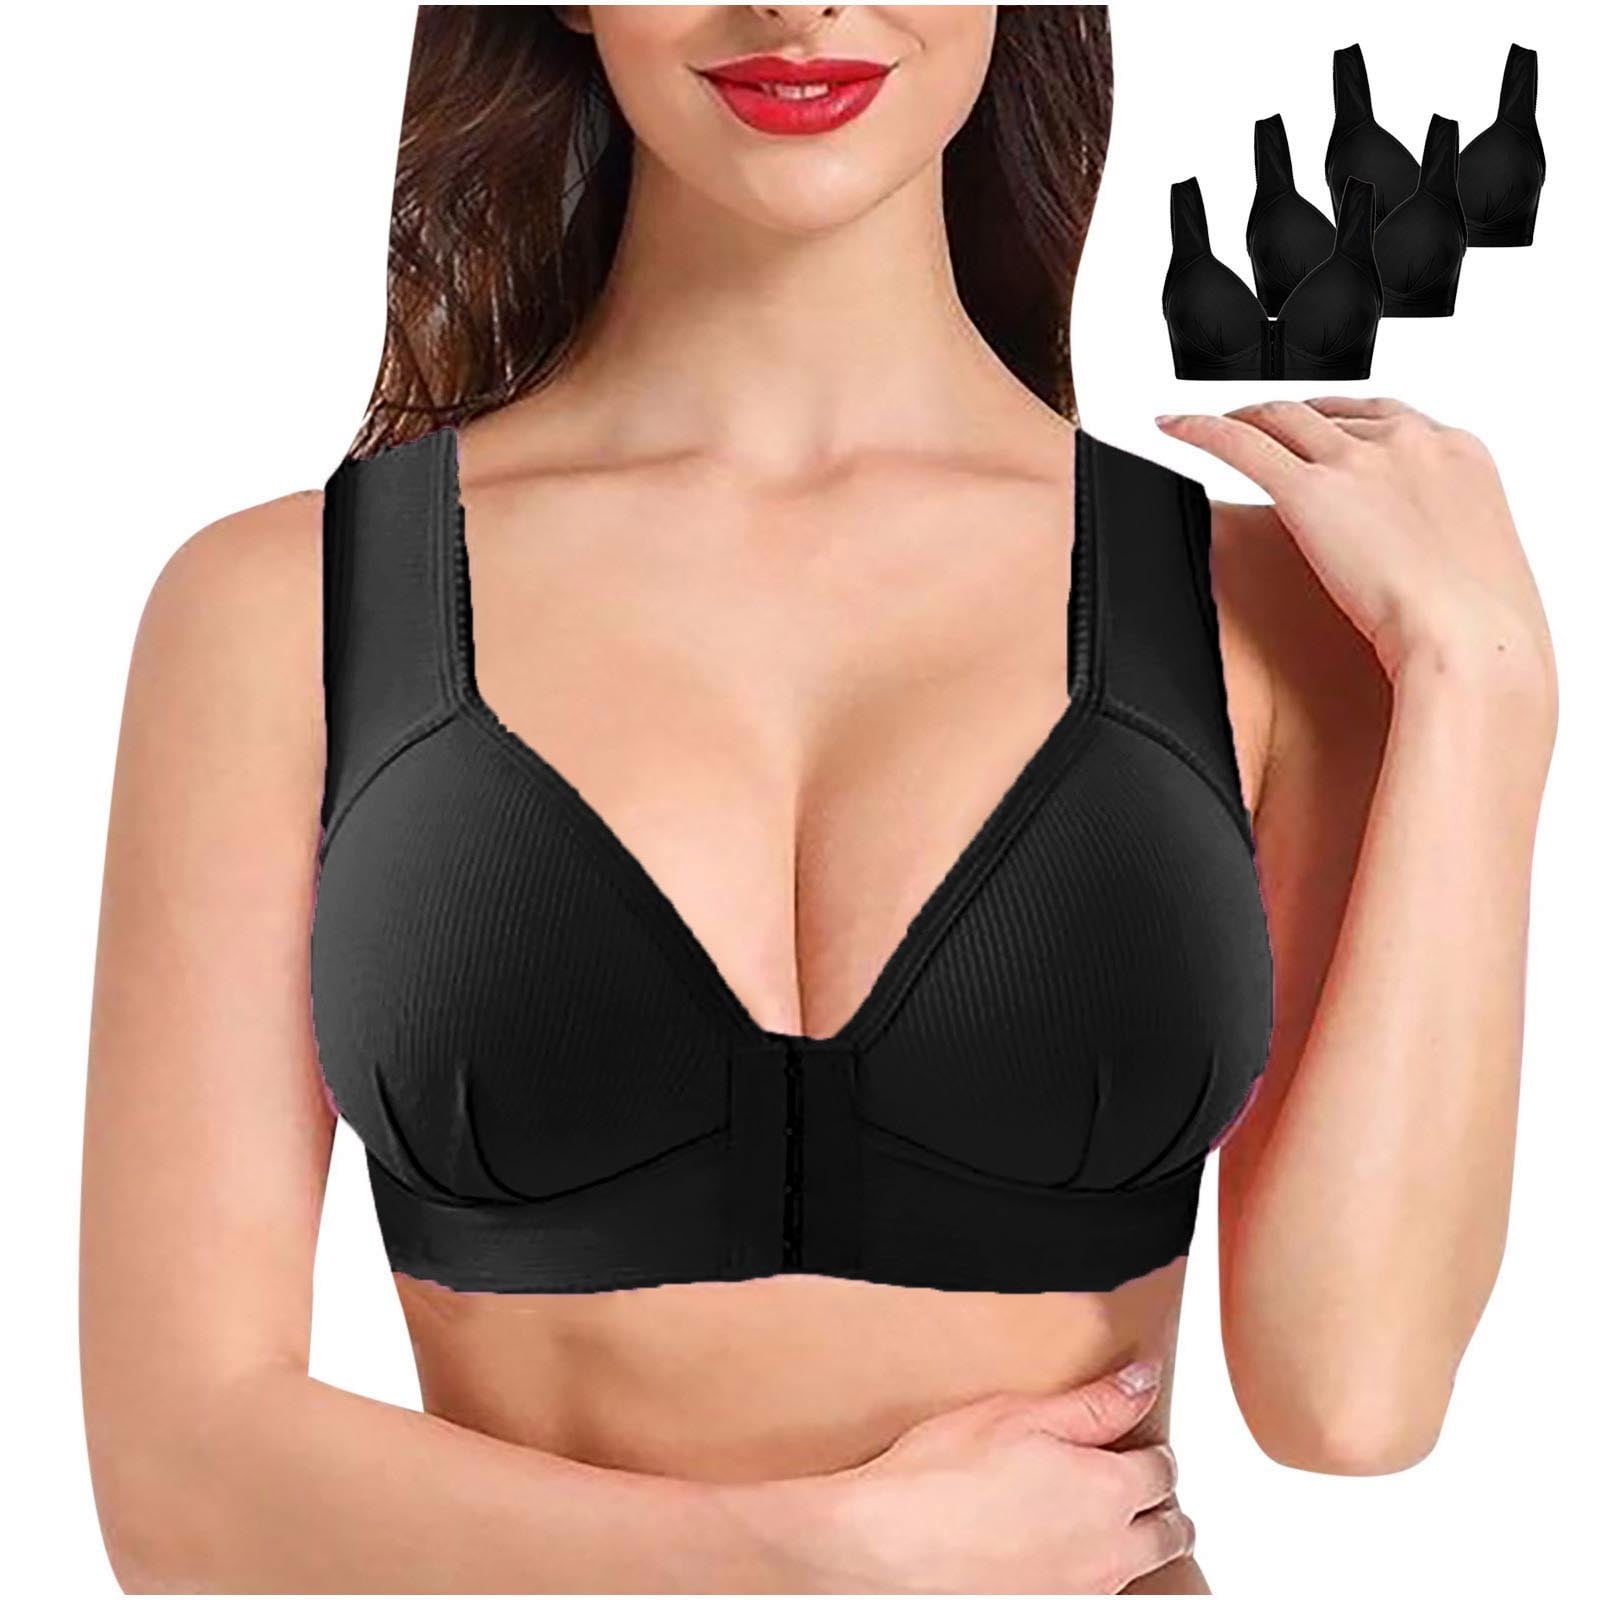  Ladies Bras Wirefree Full Support for Older Women